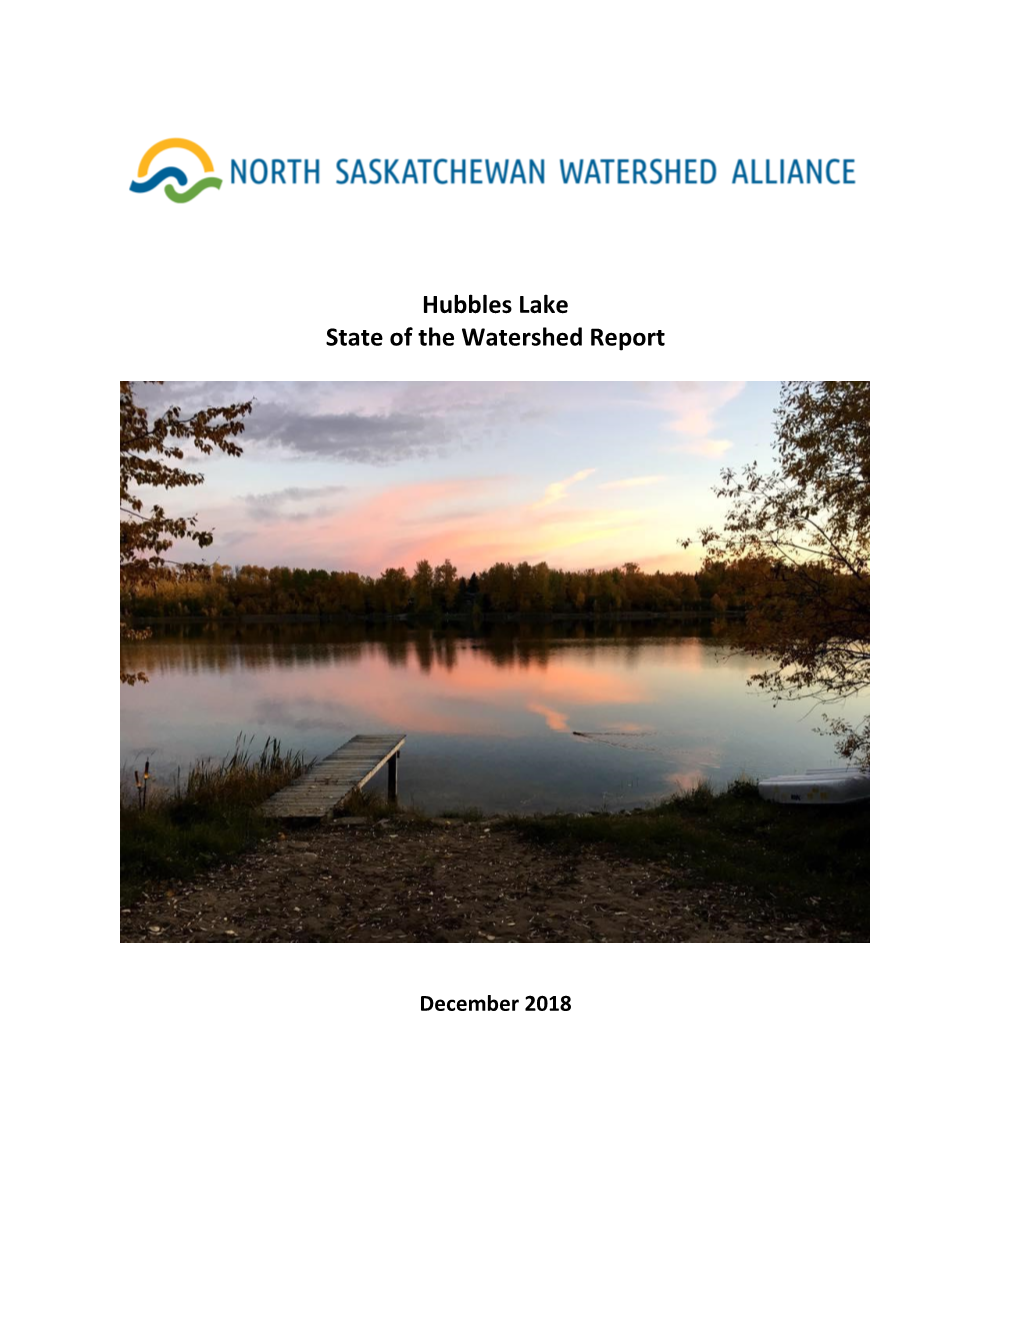 Hubbles Lake State of the Watershed Report